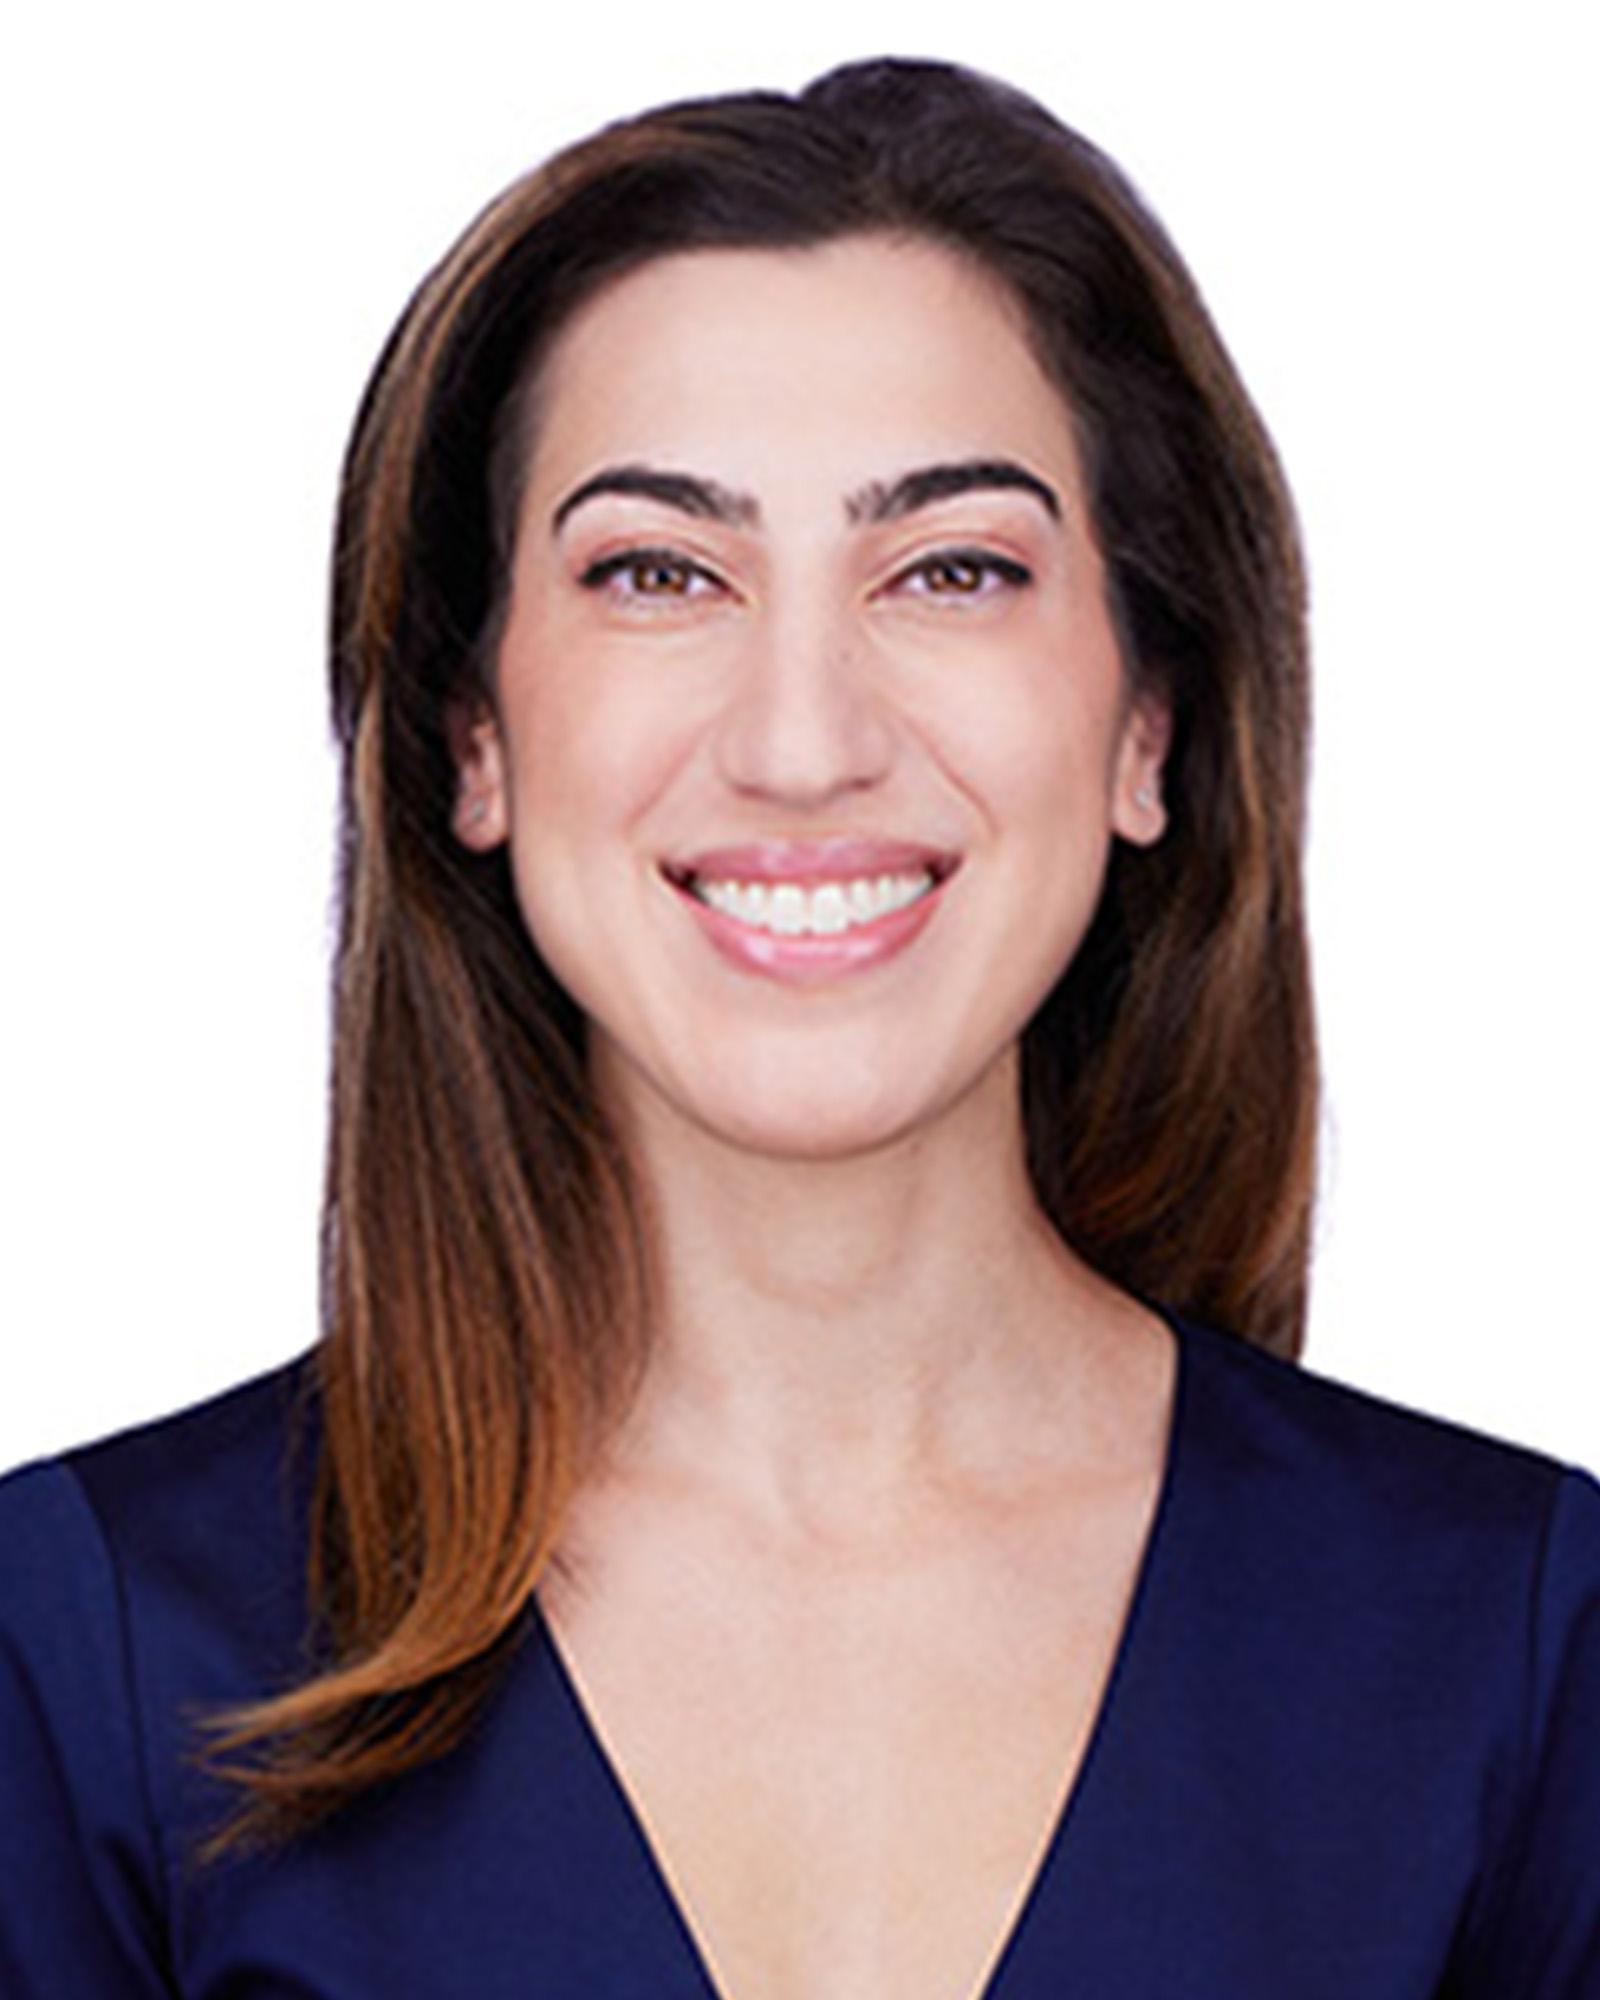 Mariam Totonchy, MD, Mohs Surgeon